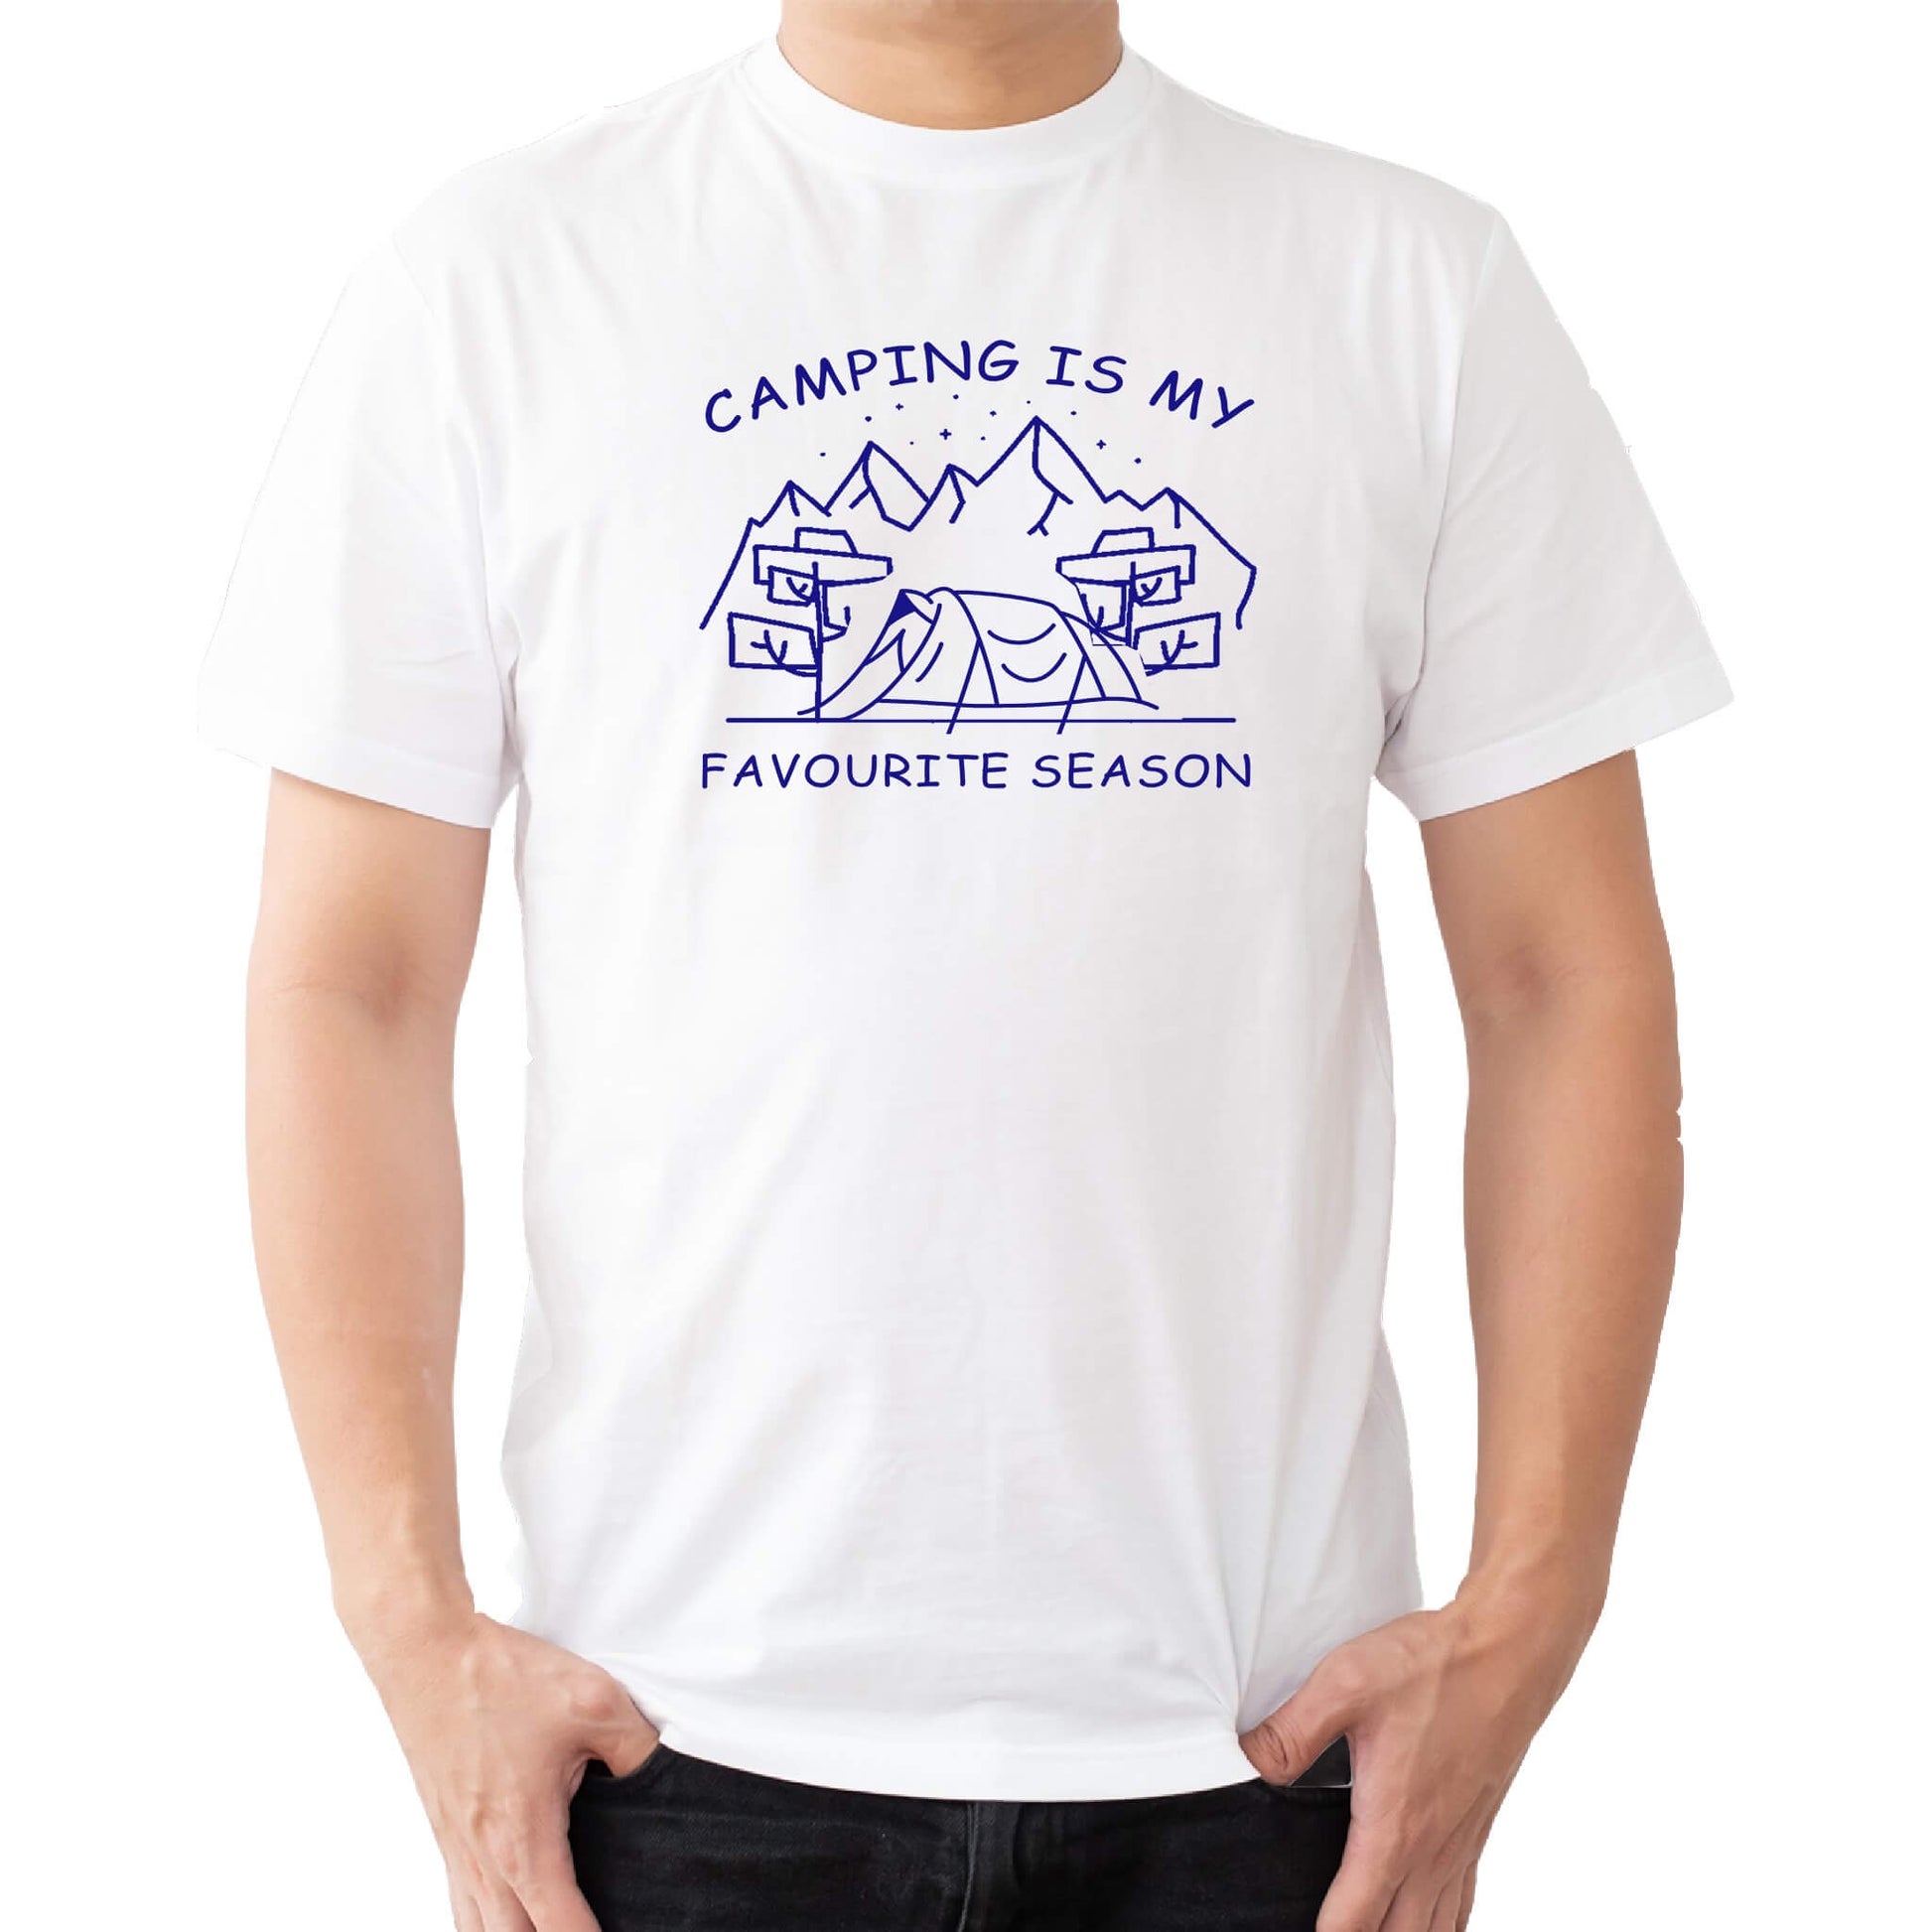  "White Graphic tee with an illustration of a tent, surrounded by nature. Text reads: 'Camping is my favorite season.' Celebrate the great outdoors!"